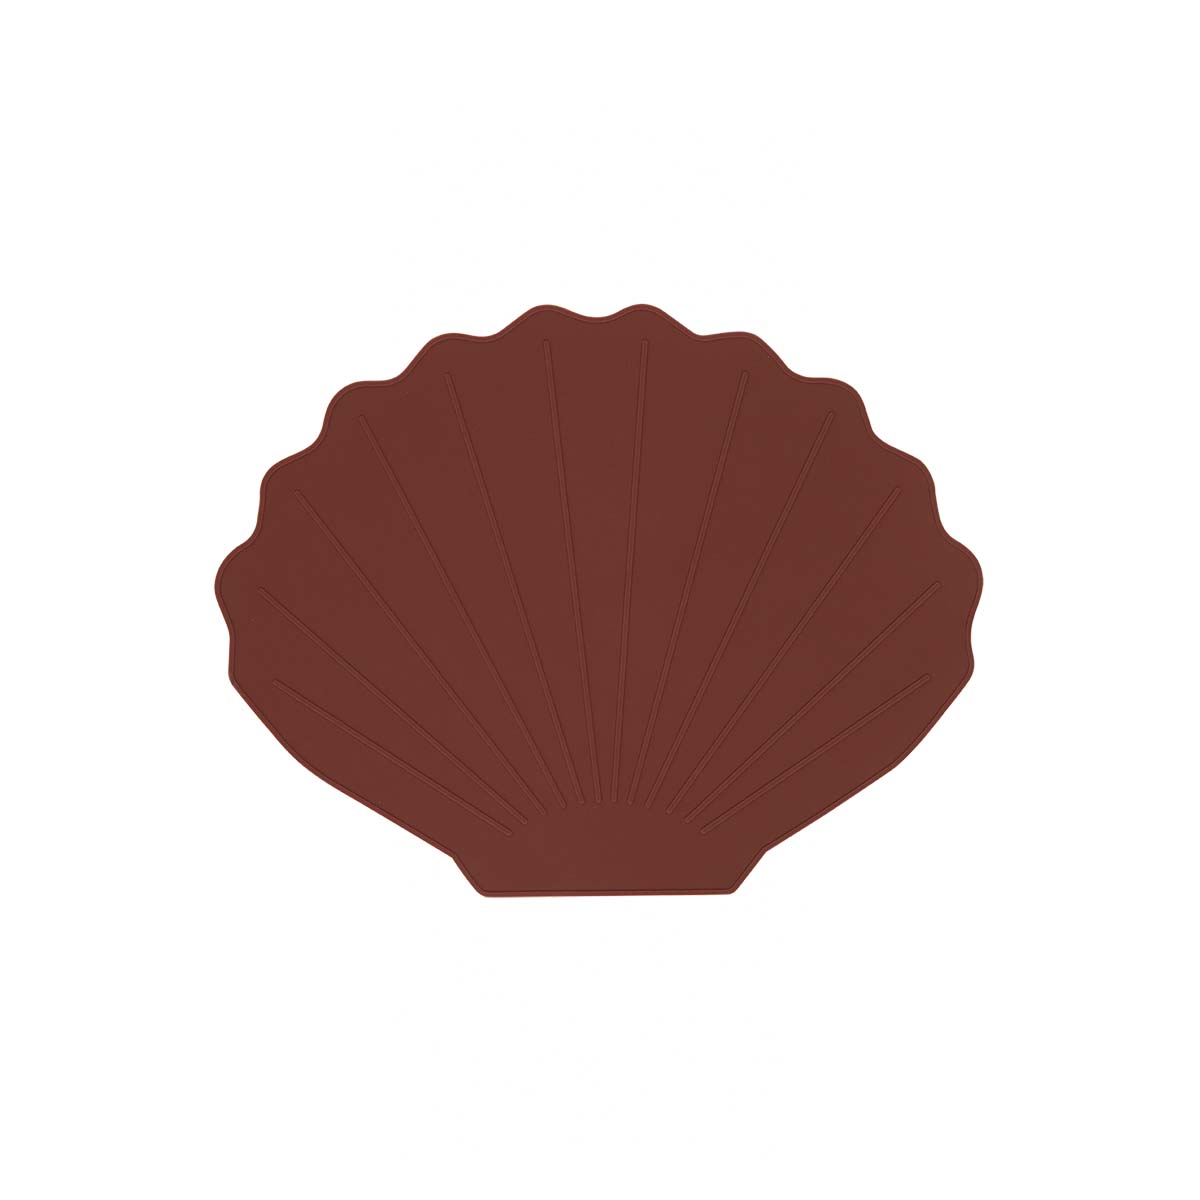 OYOY MINI Placemat Scallop Placemat 305 Nutmeg